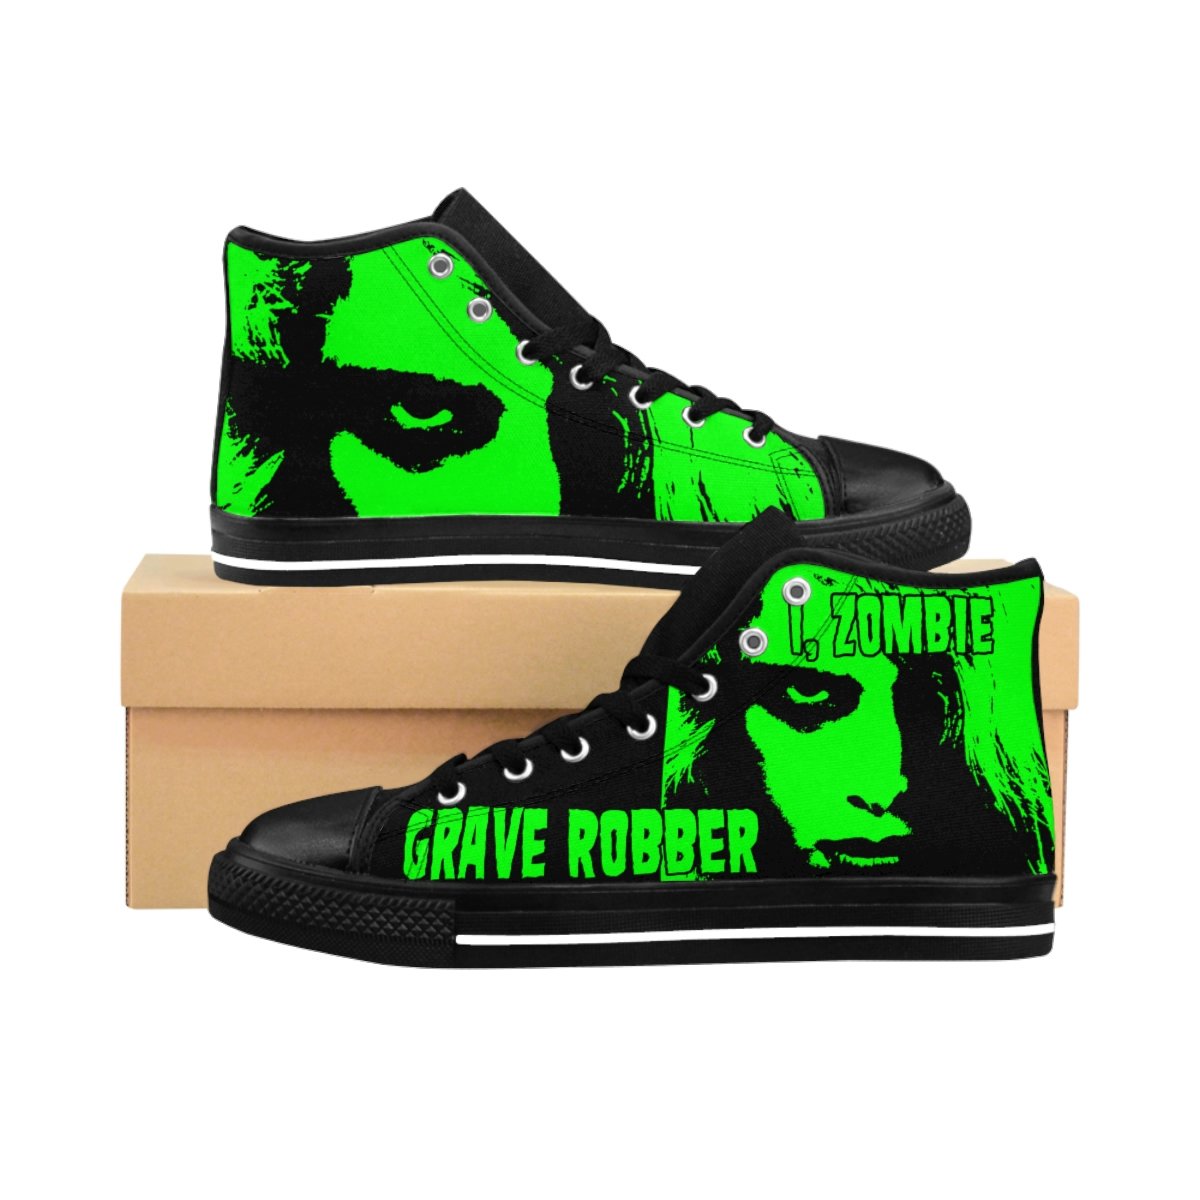 Grave Robber – I, Zombie Men’s High-top Sneakers